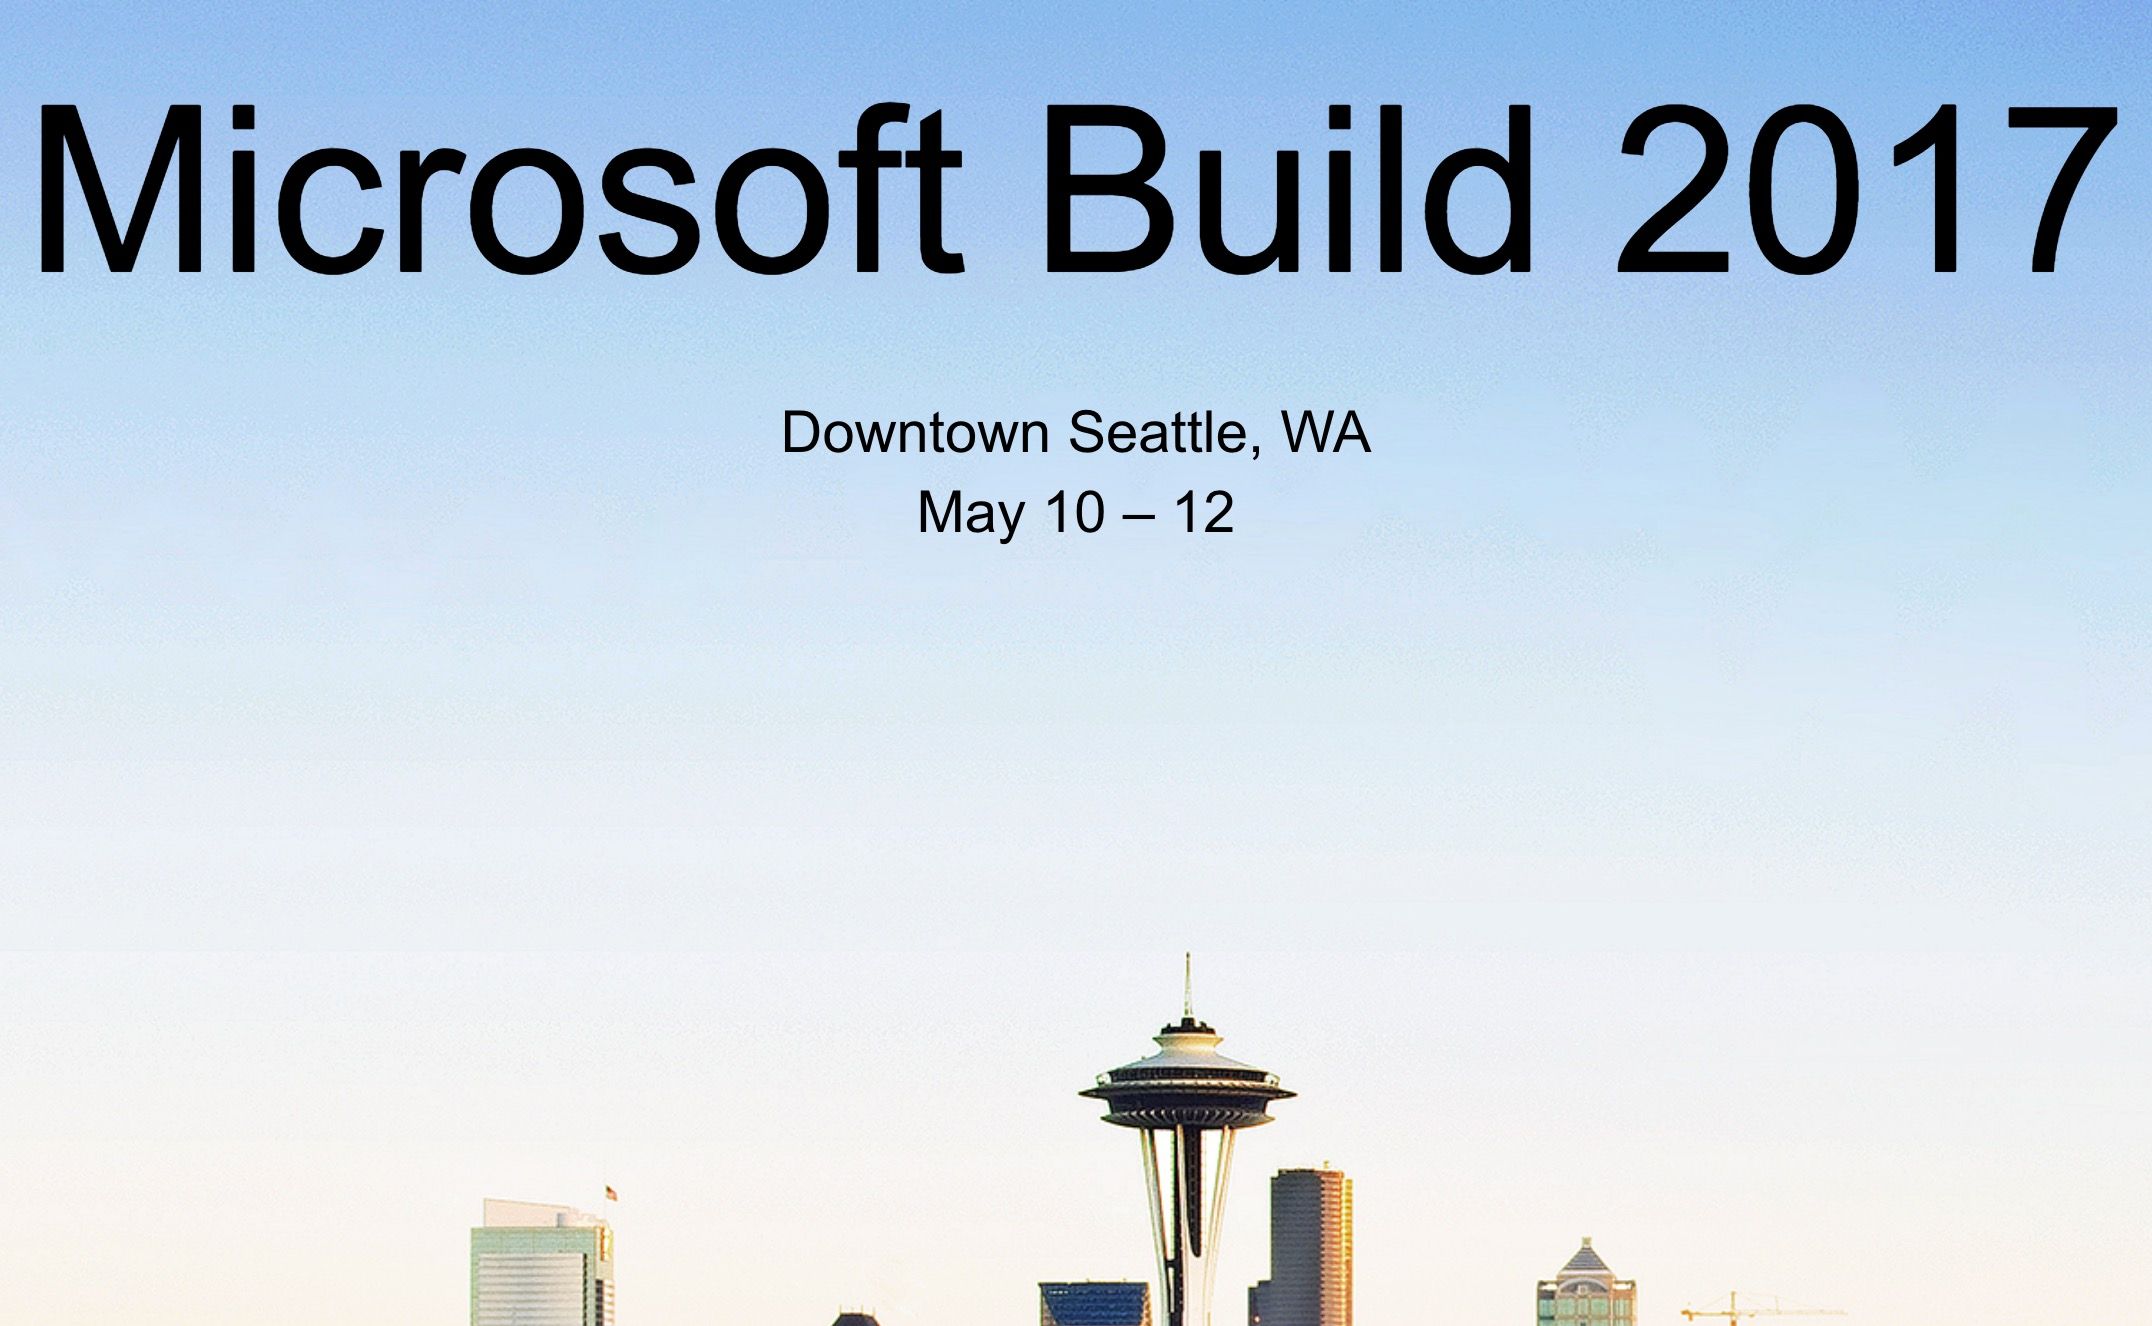 Microsoft Build ticket registration will open up on Valentine's Day